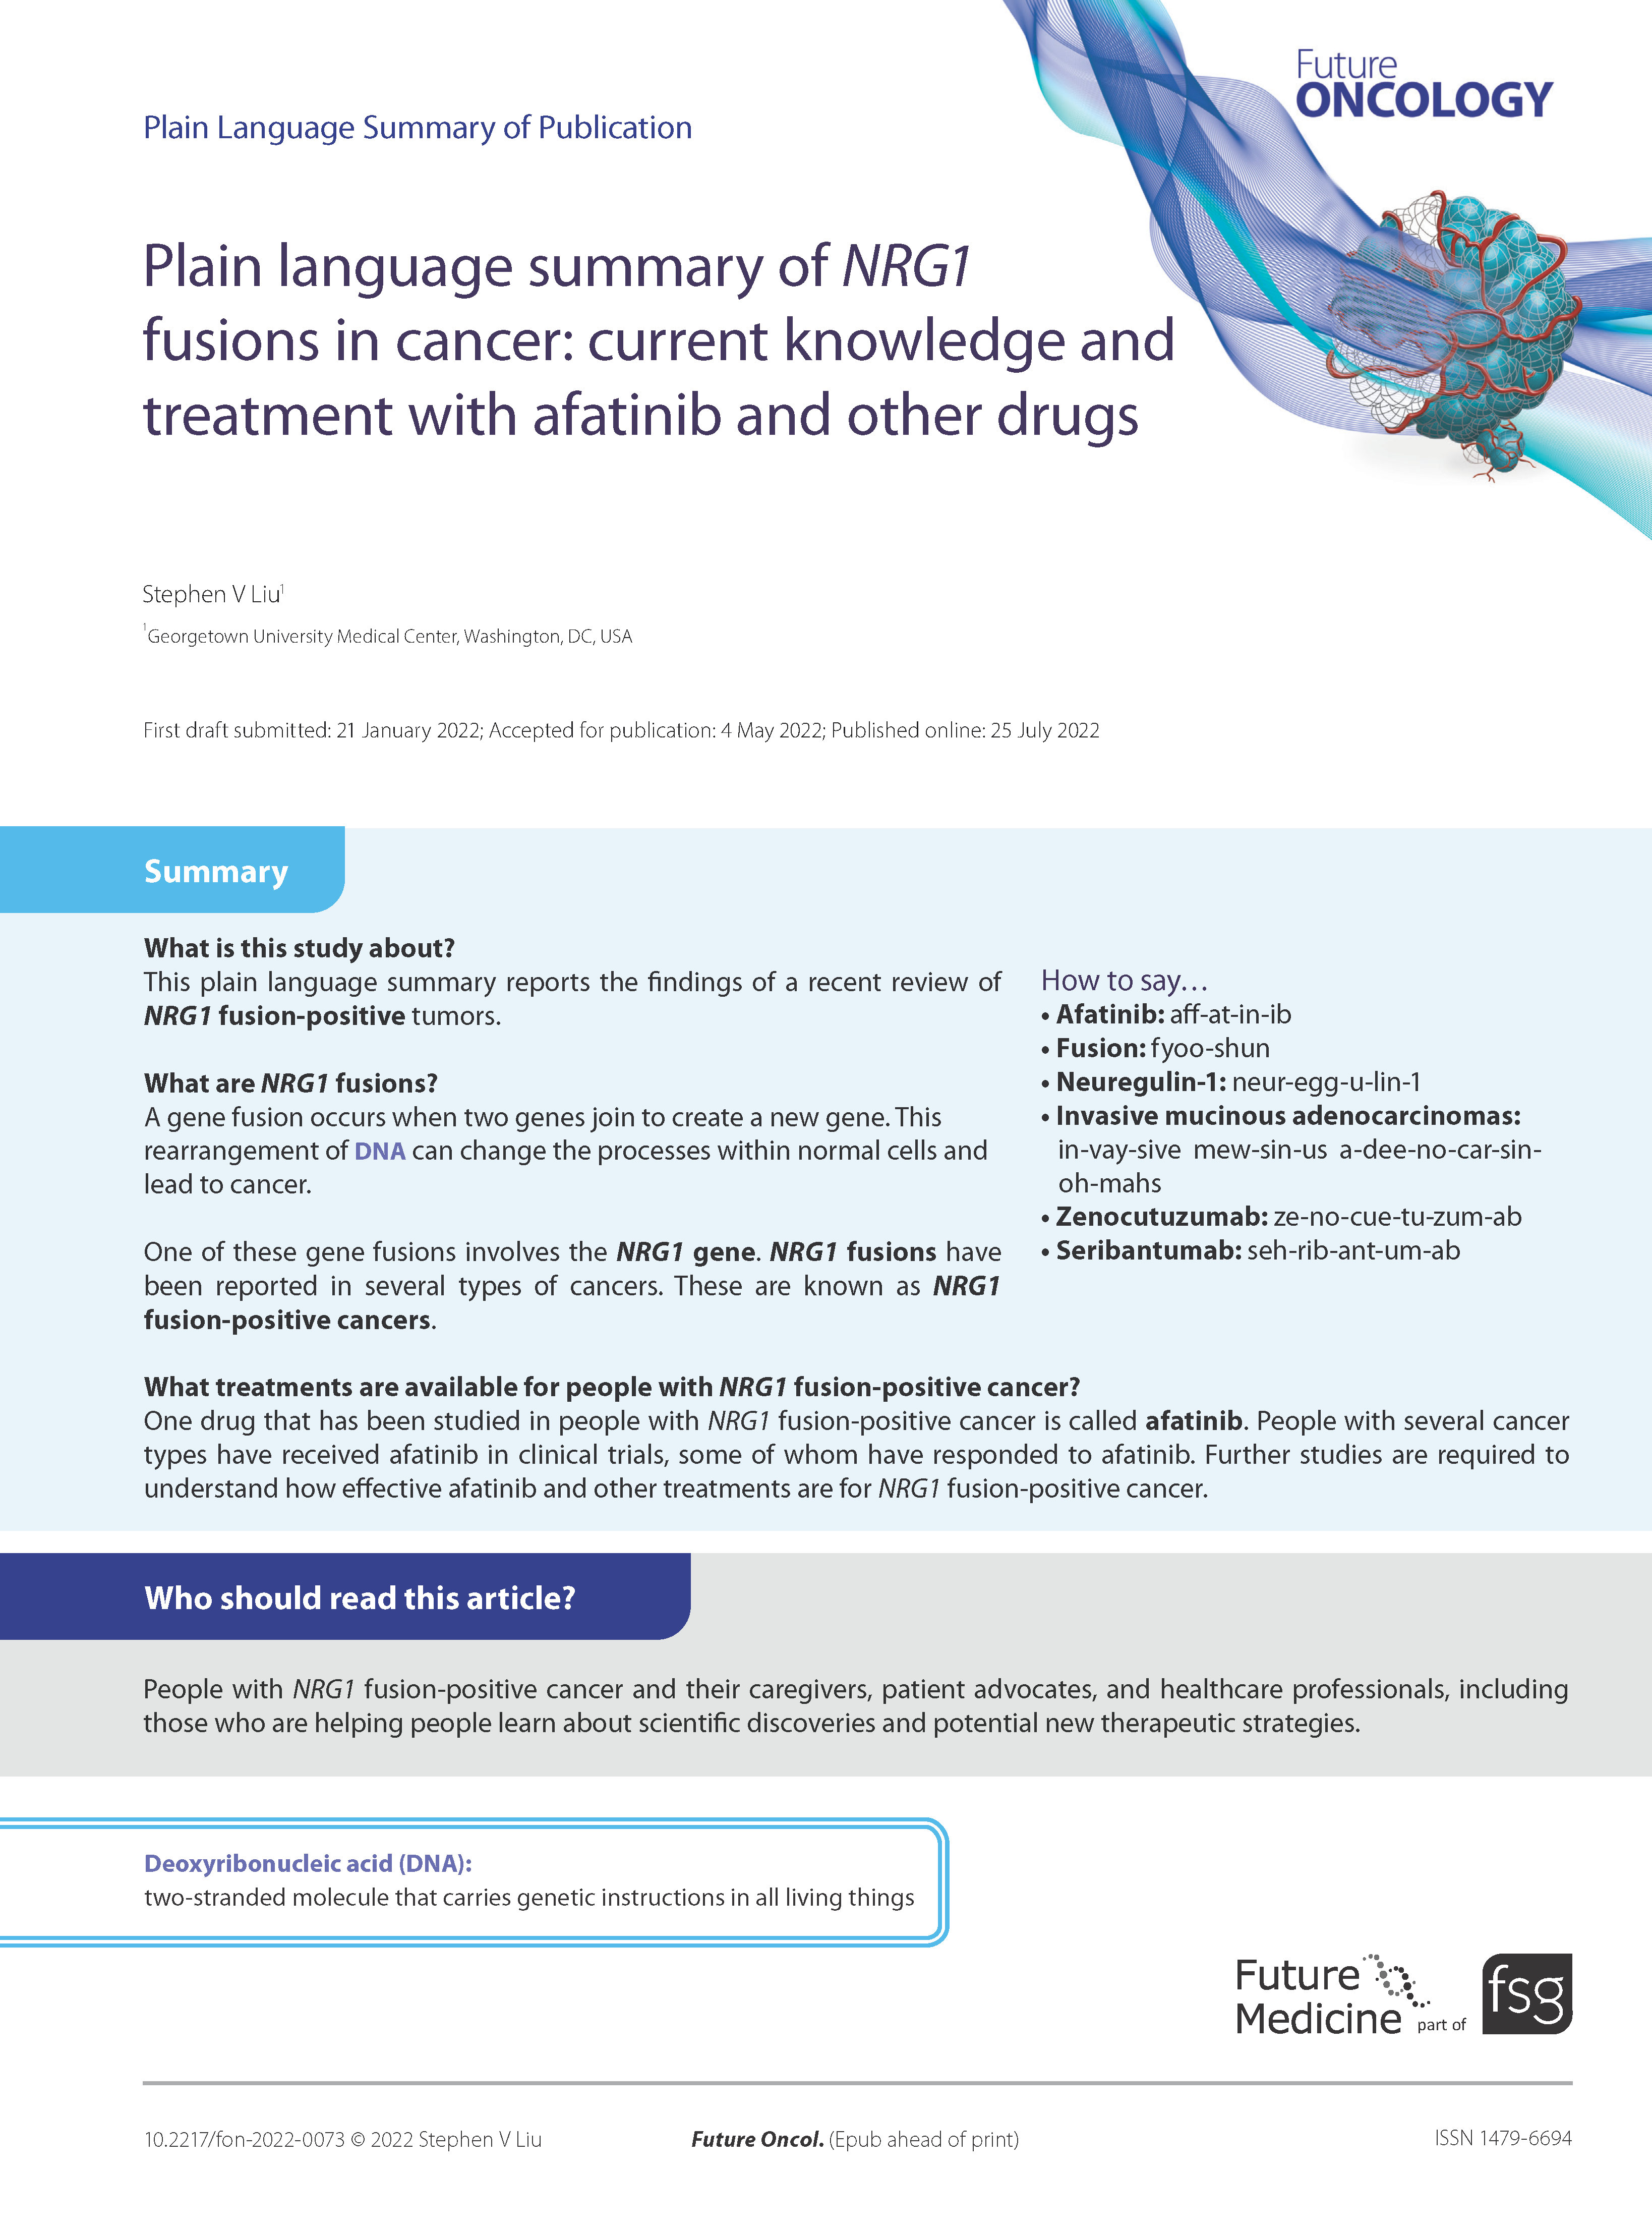 Plain language summary of NRG1 fusions in cancer: current knowledge and treatment with afatinib and other drugs